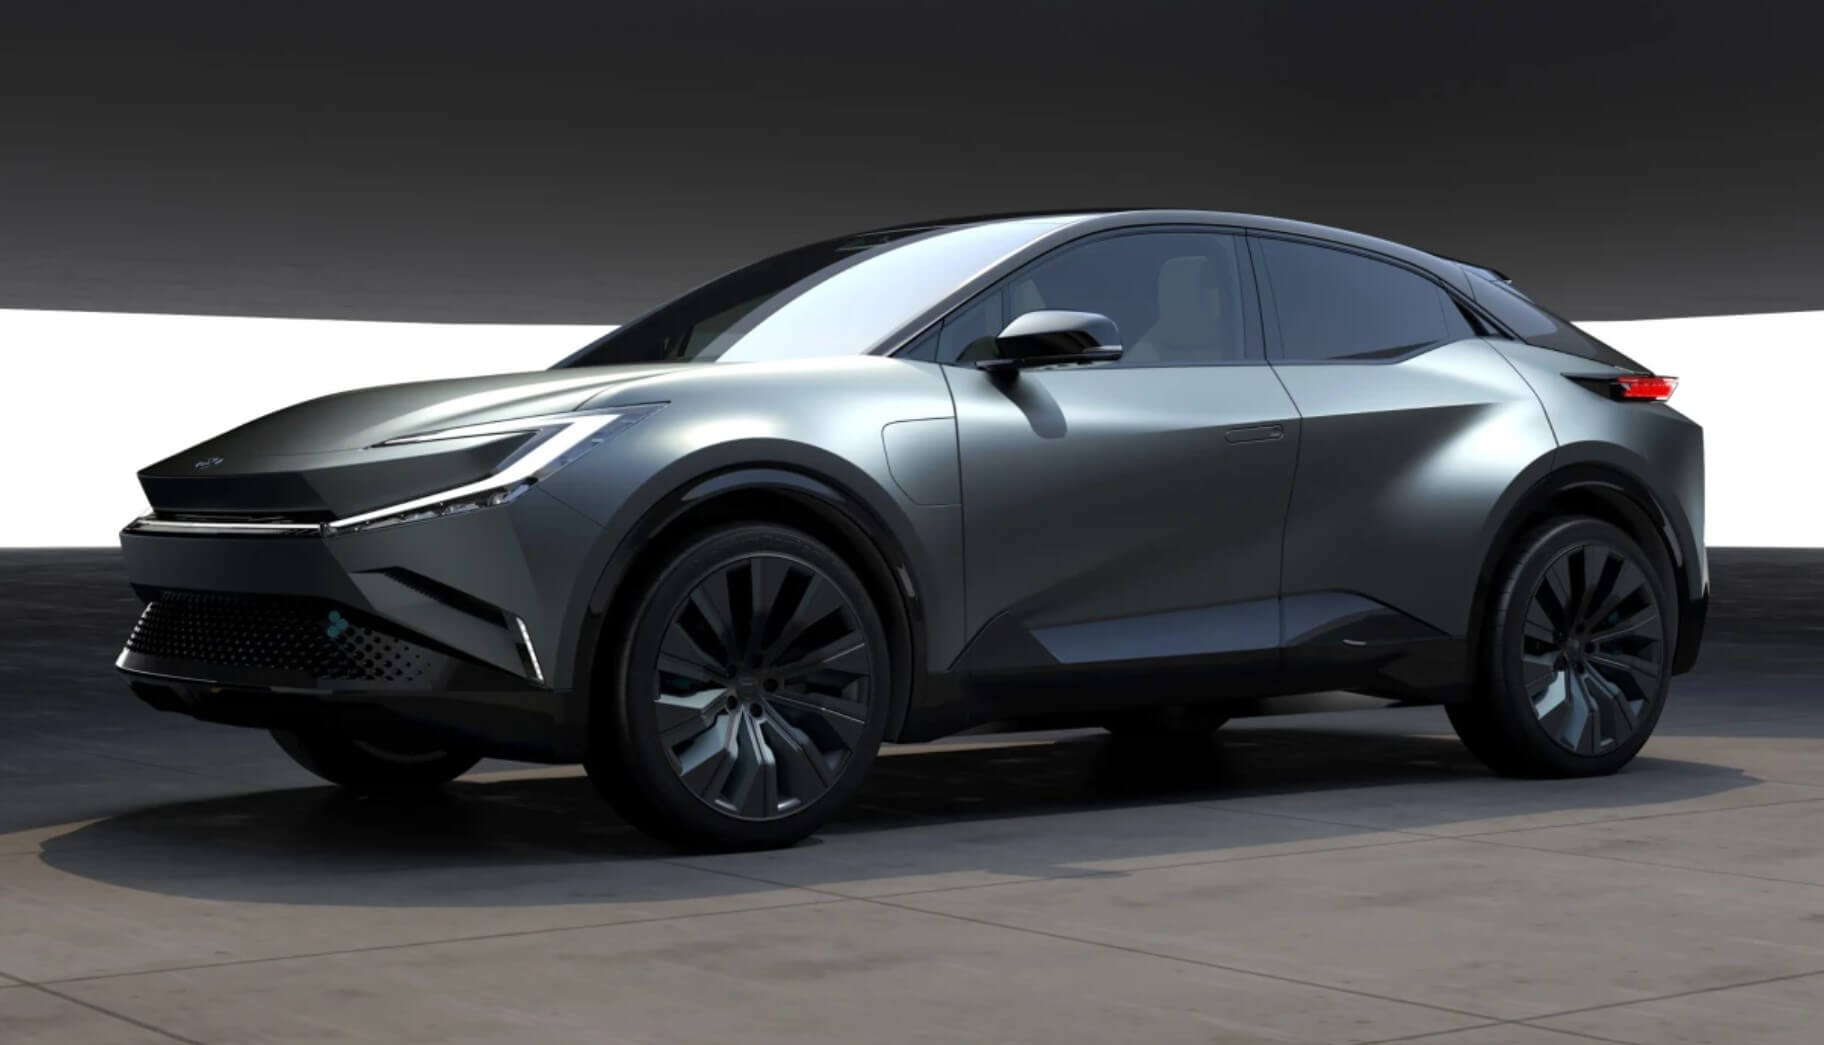 What's next from Toyota's electric bZ line? - Automotive Daily